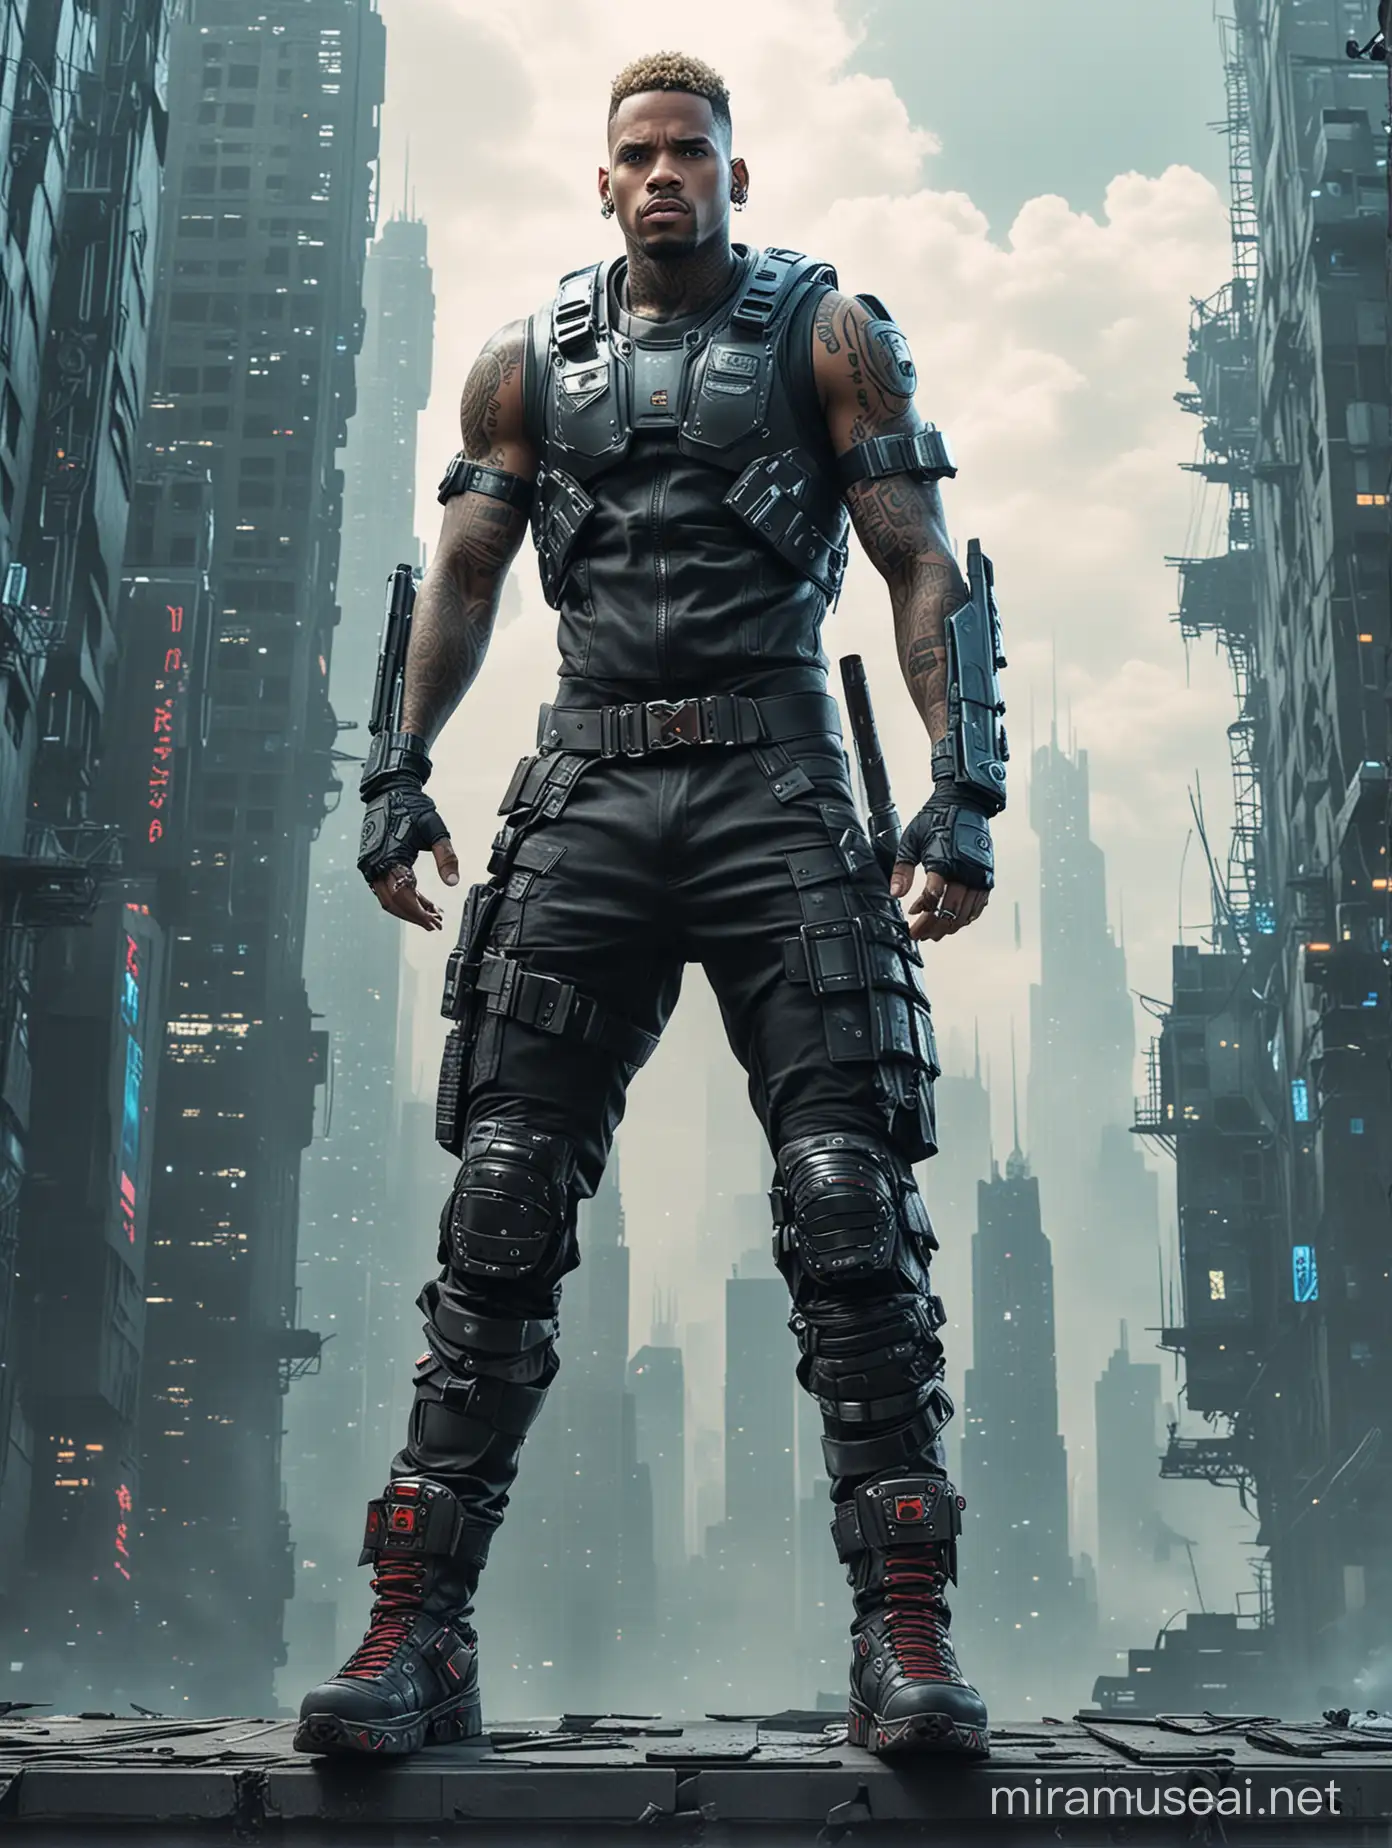 Chris brown as a cyber punk warrior standing ontop a building in a sci-fi universe